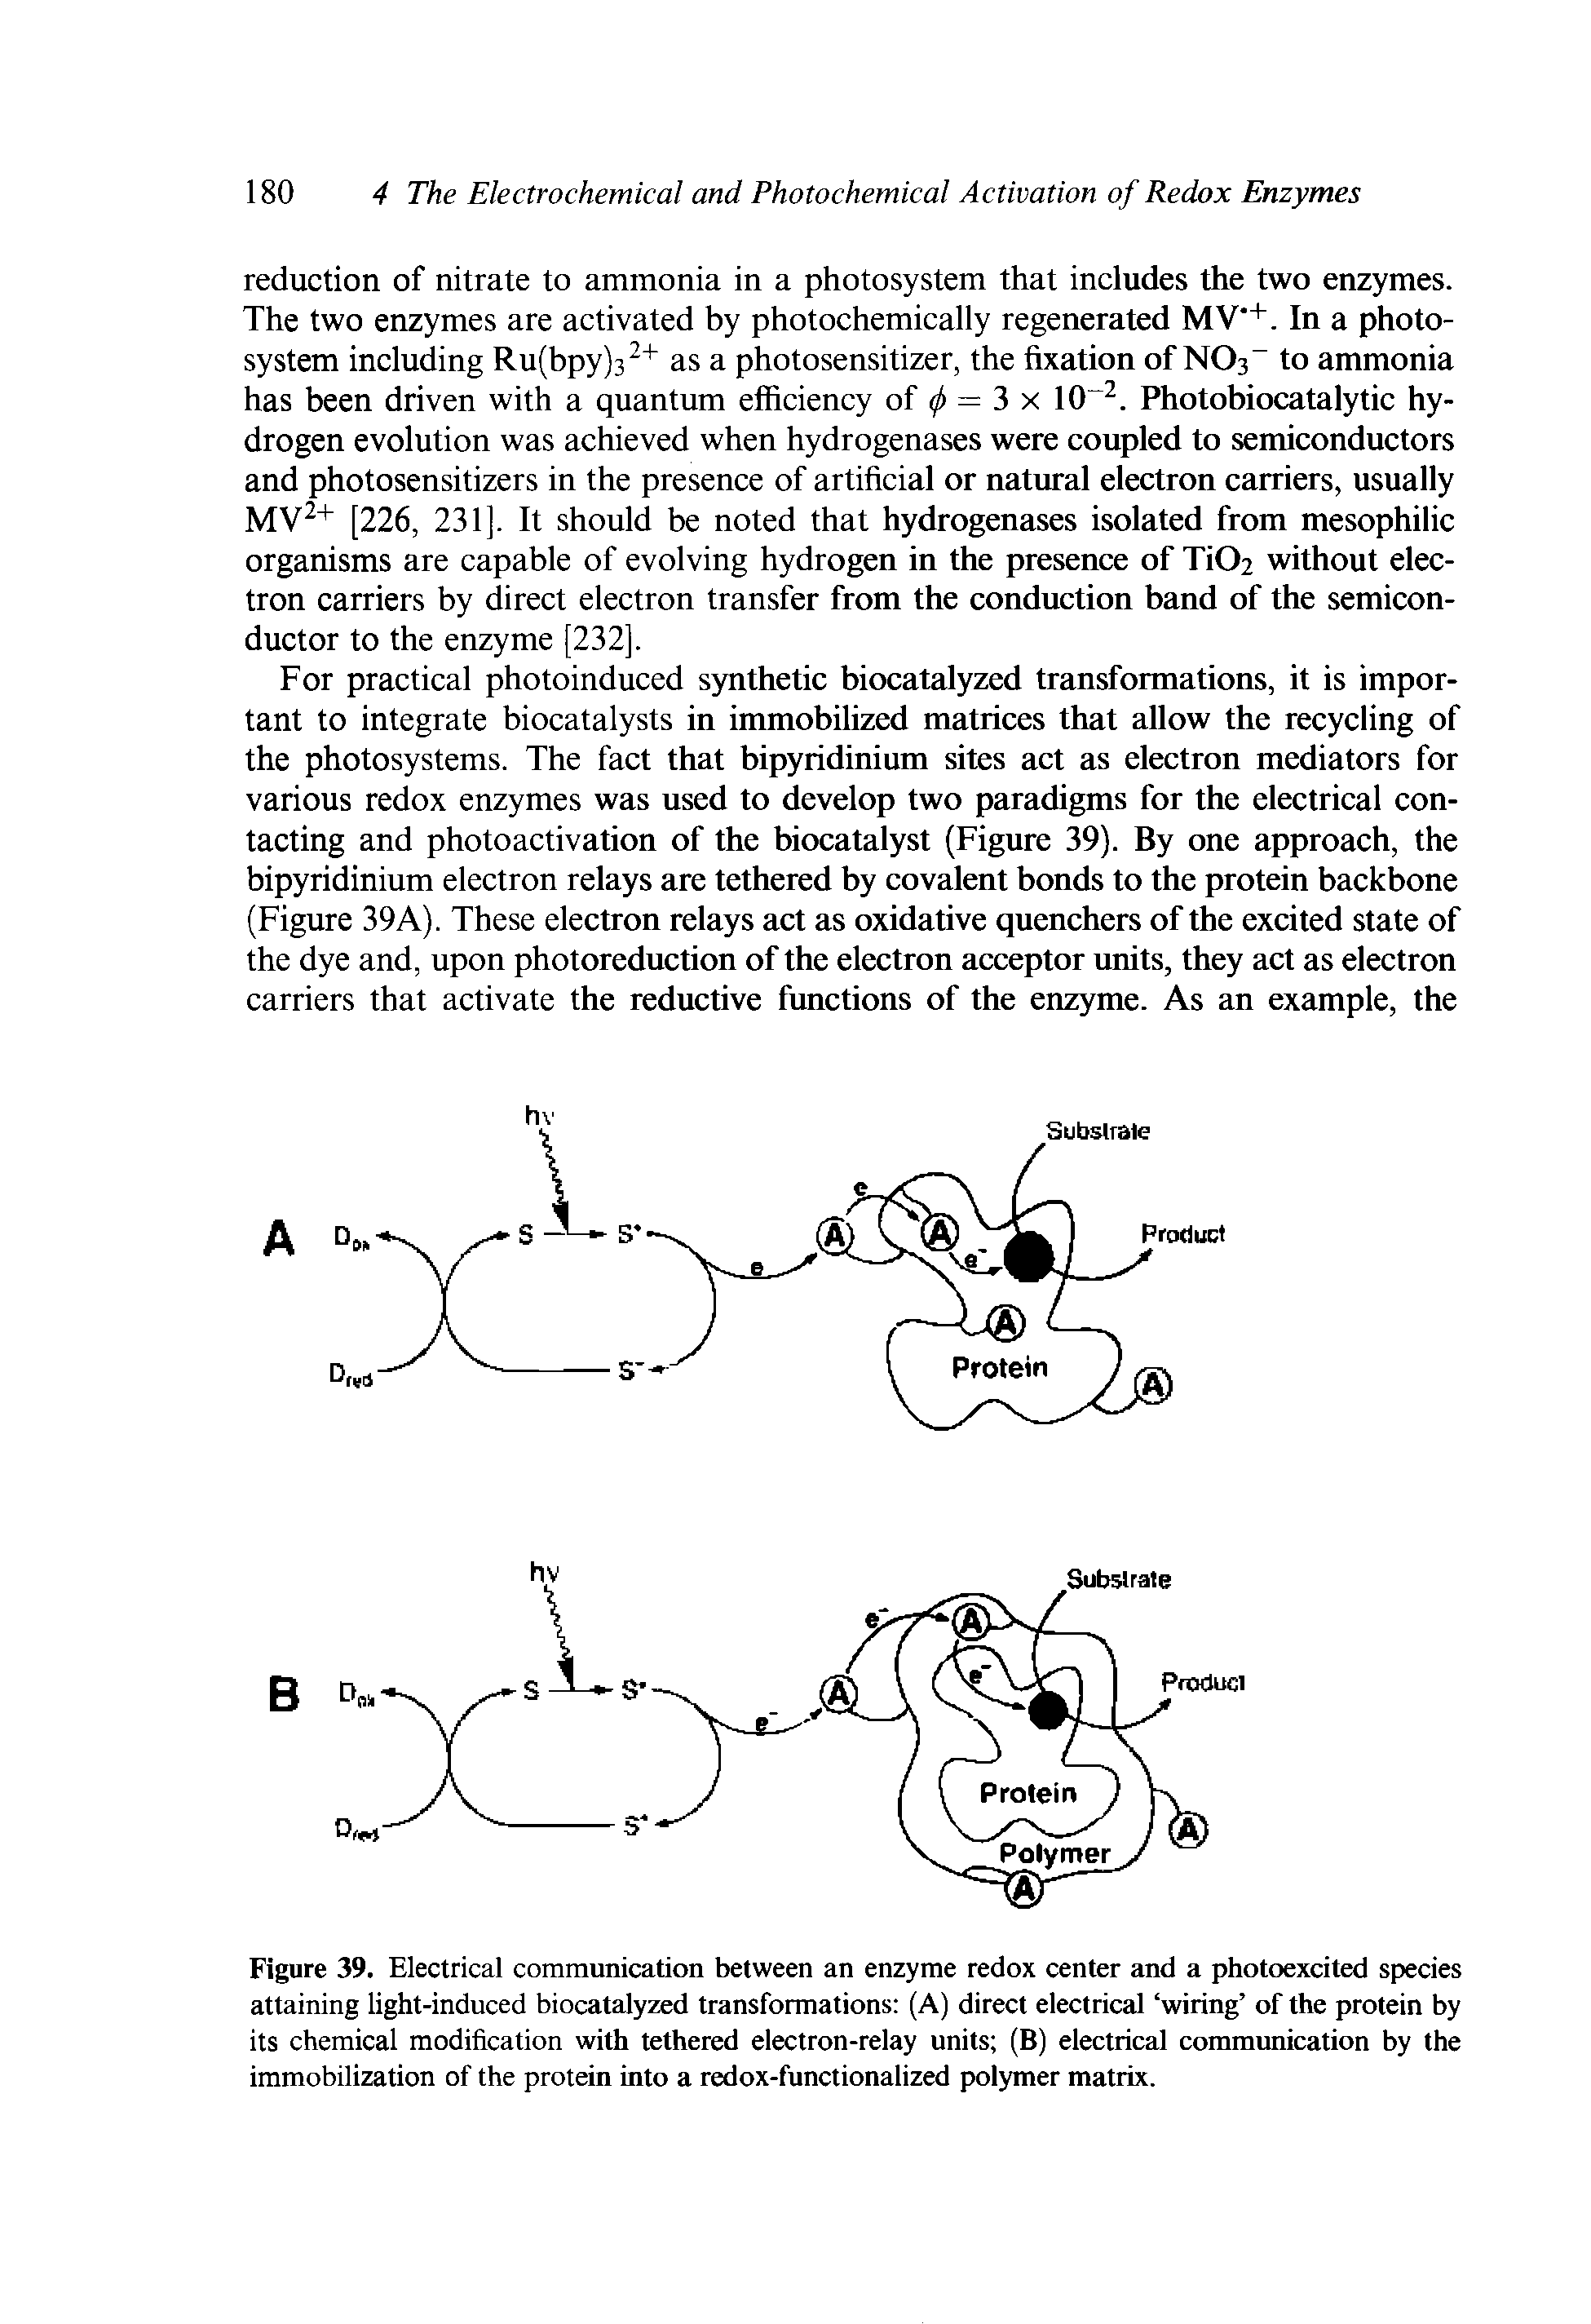 Figure 39. Electrical communication between an enzyme redox center and a photoexcited species attaining light-induced biocatalyzed transformations (A) direct electrical wiring of the protein by its chemical modification with tethered electron-relay units (B) electrical communication by the immobilization of the protein into a redox-functionalized polymer matrix.